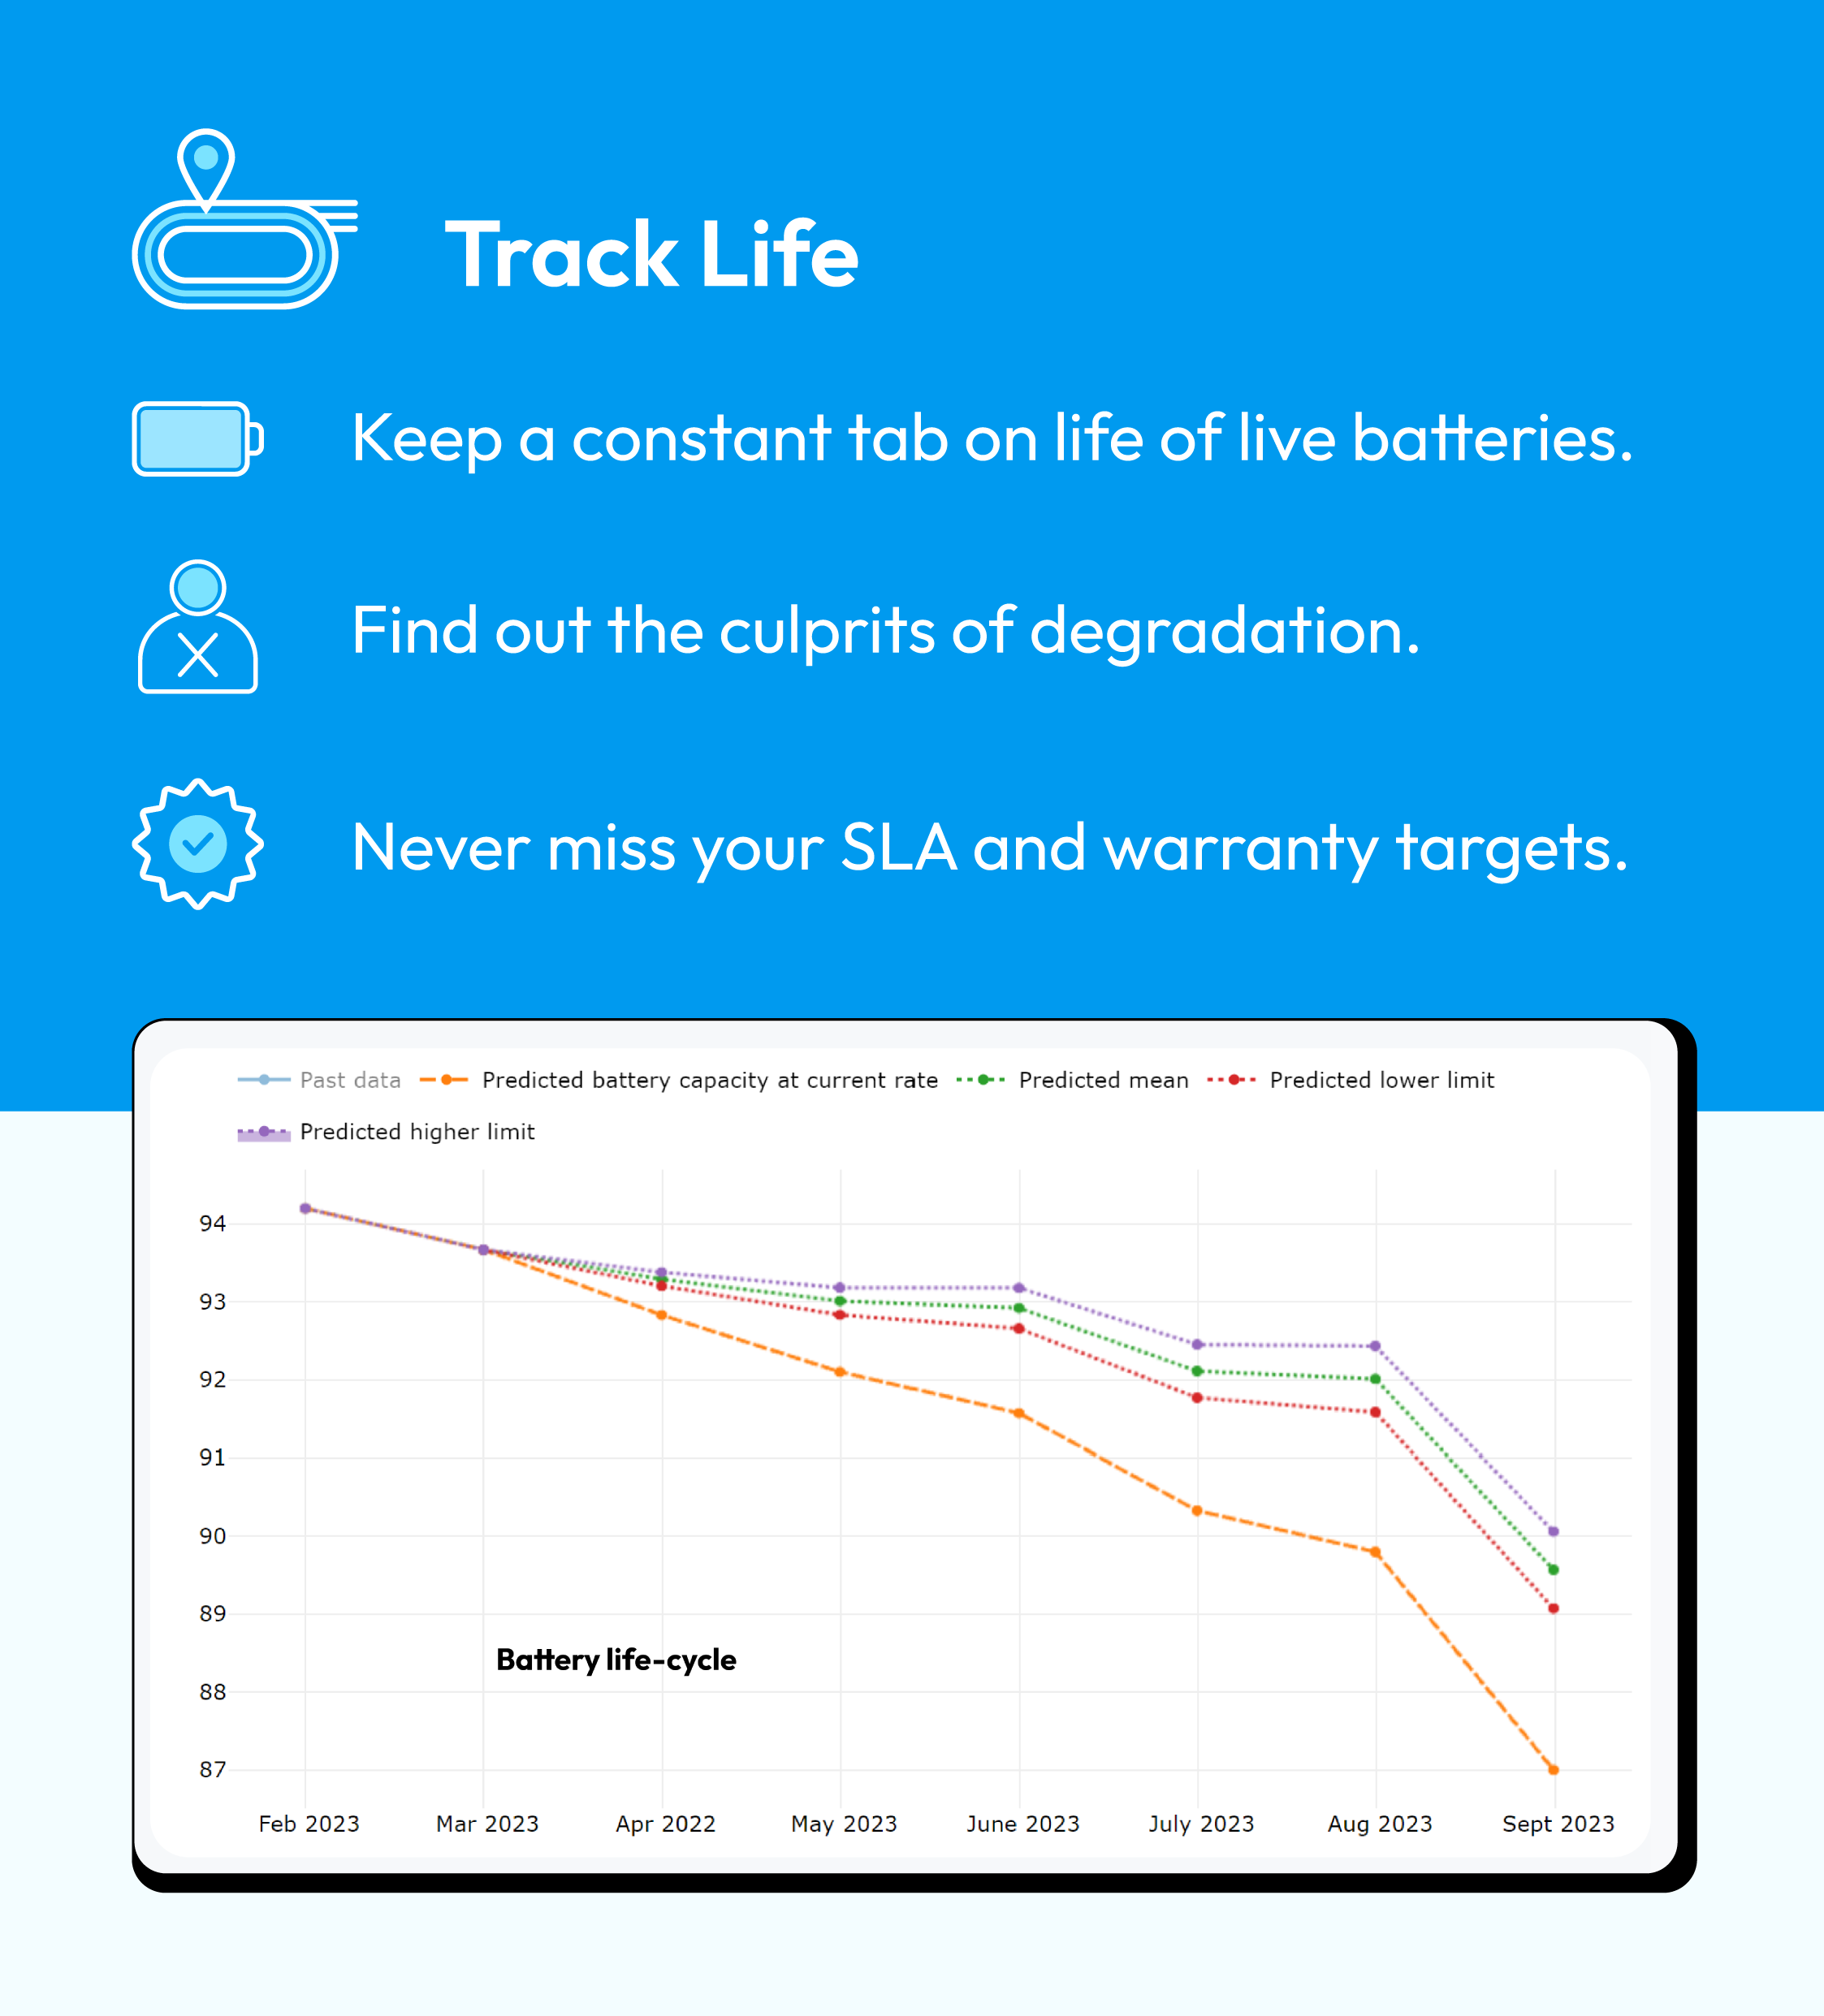 Track life : Keep a constant tab on life of live batteries. Find out the culprits of degradation. Never miss your SLA and warranty targets.